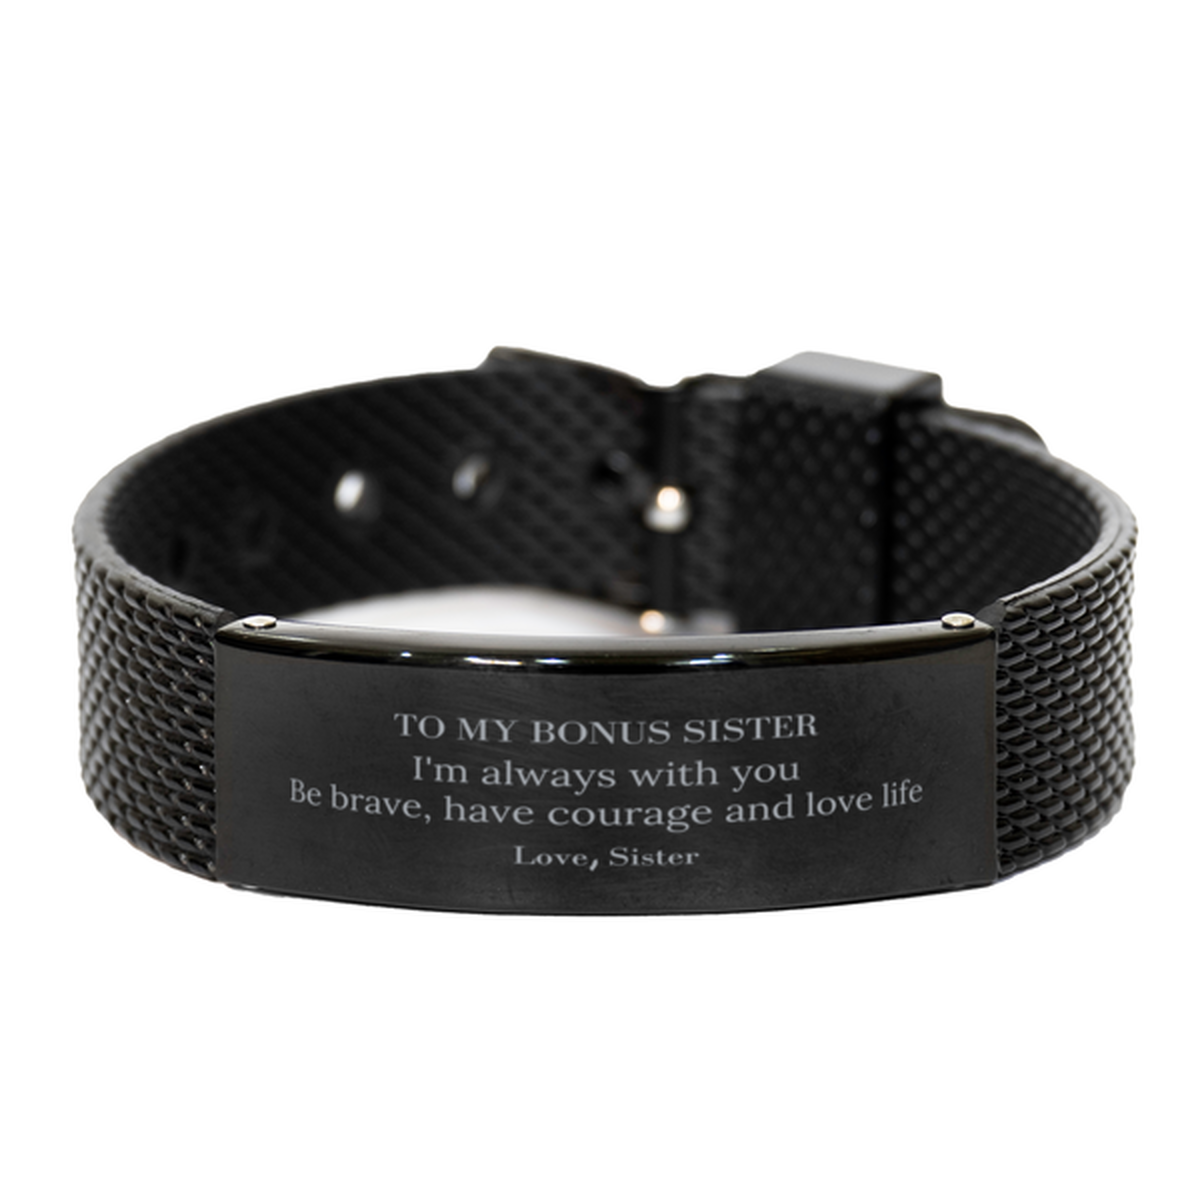 To My Bonus Sister Gifts from Sister, Unique Black Shark Mesh Bracelet Inspirational Christmas Birthday Graduation Gifts for Bonus Sister I'm always with you. Be brave, have courage and love life. Love, Sister